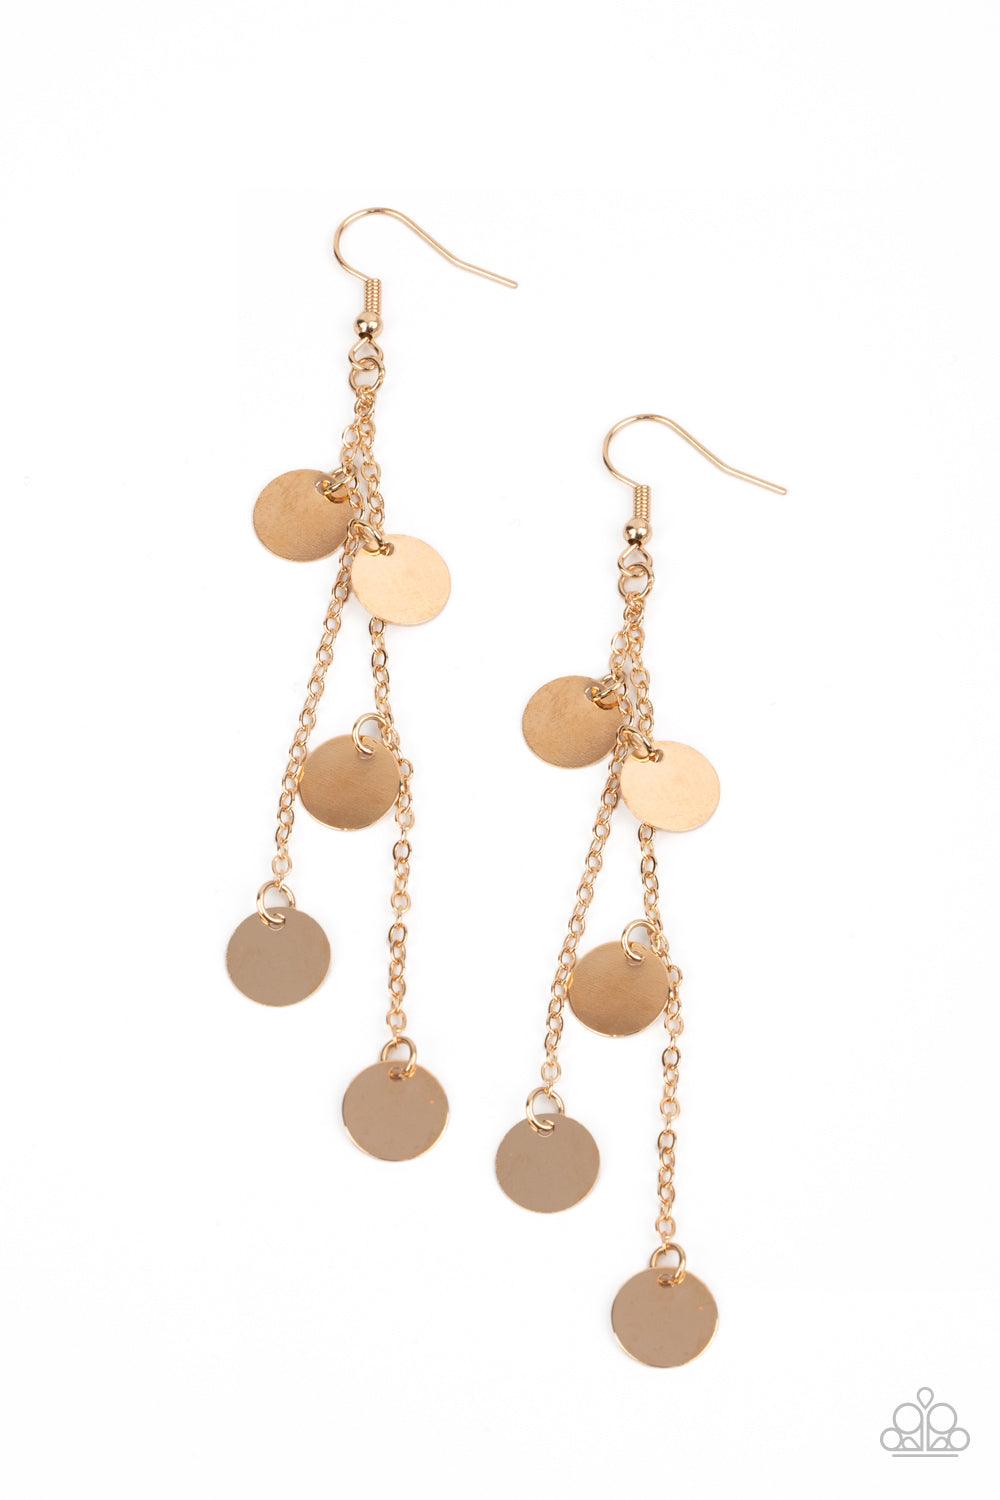 Paparazzi Accessories Take A Good Look - Gold Dainty gold discs haphazardly swing from two dainty gold chains, coalescing into a noisemaking shimmer. Earring attaches to a standard fishhook fitting. Sold as one pair of earrings. Earrings